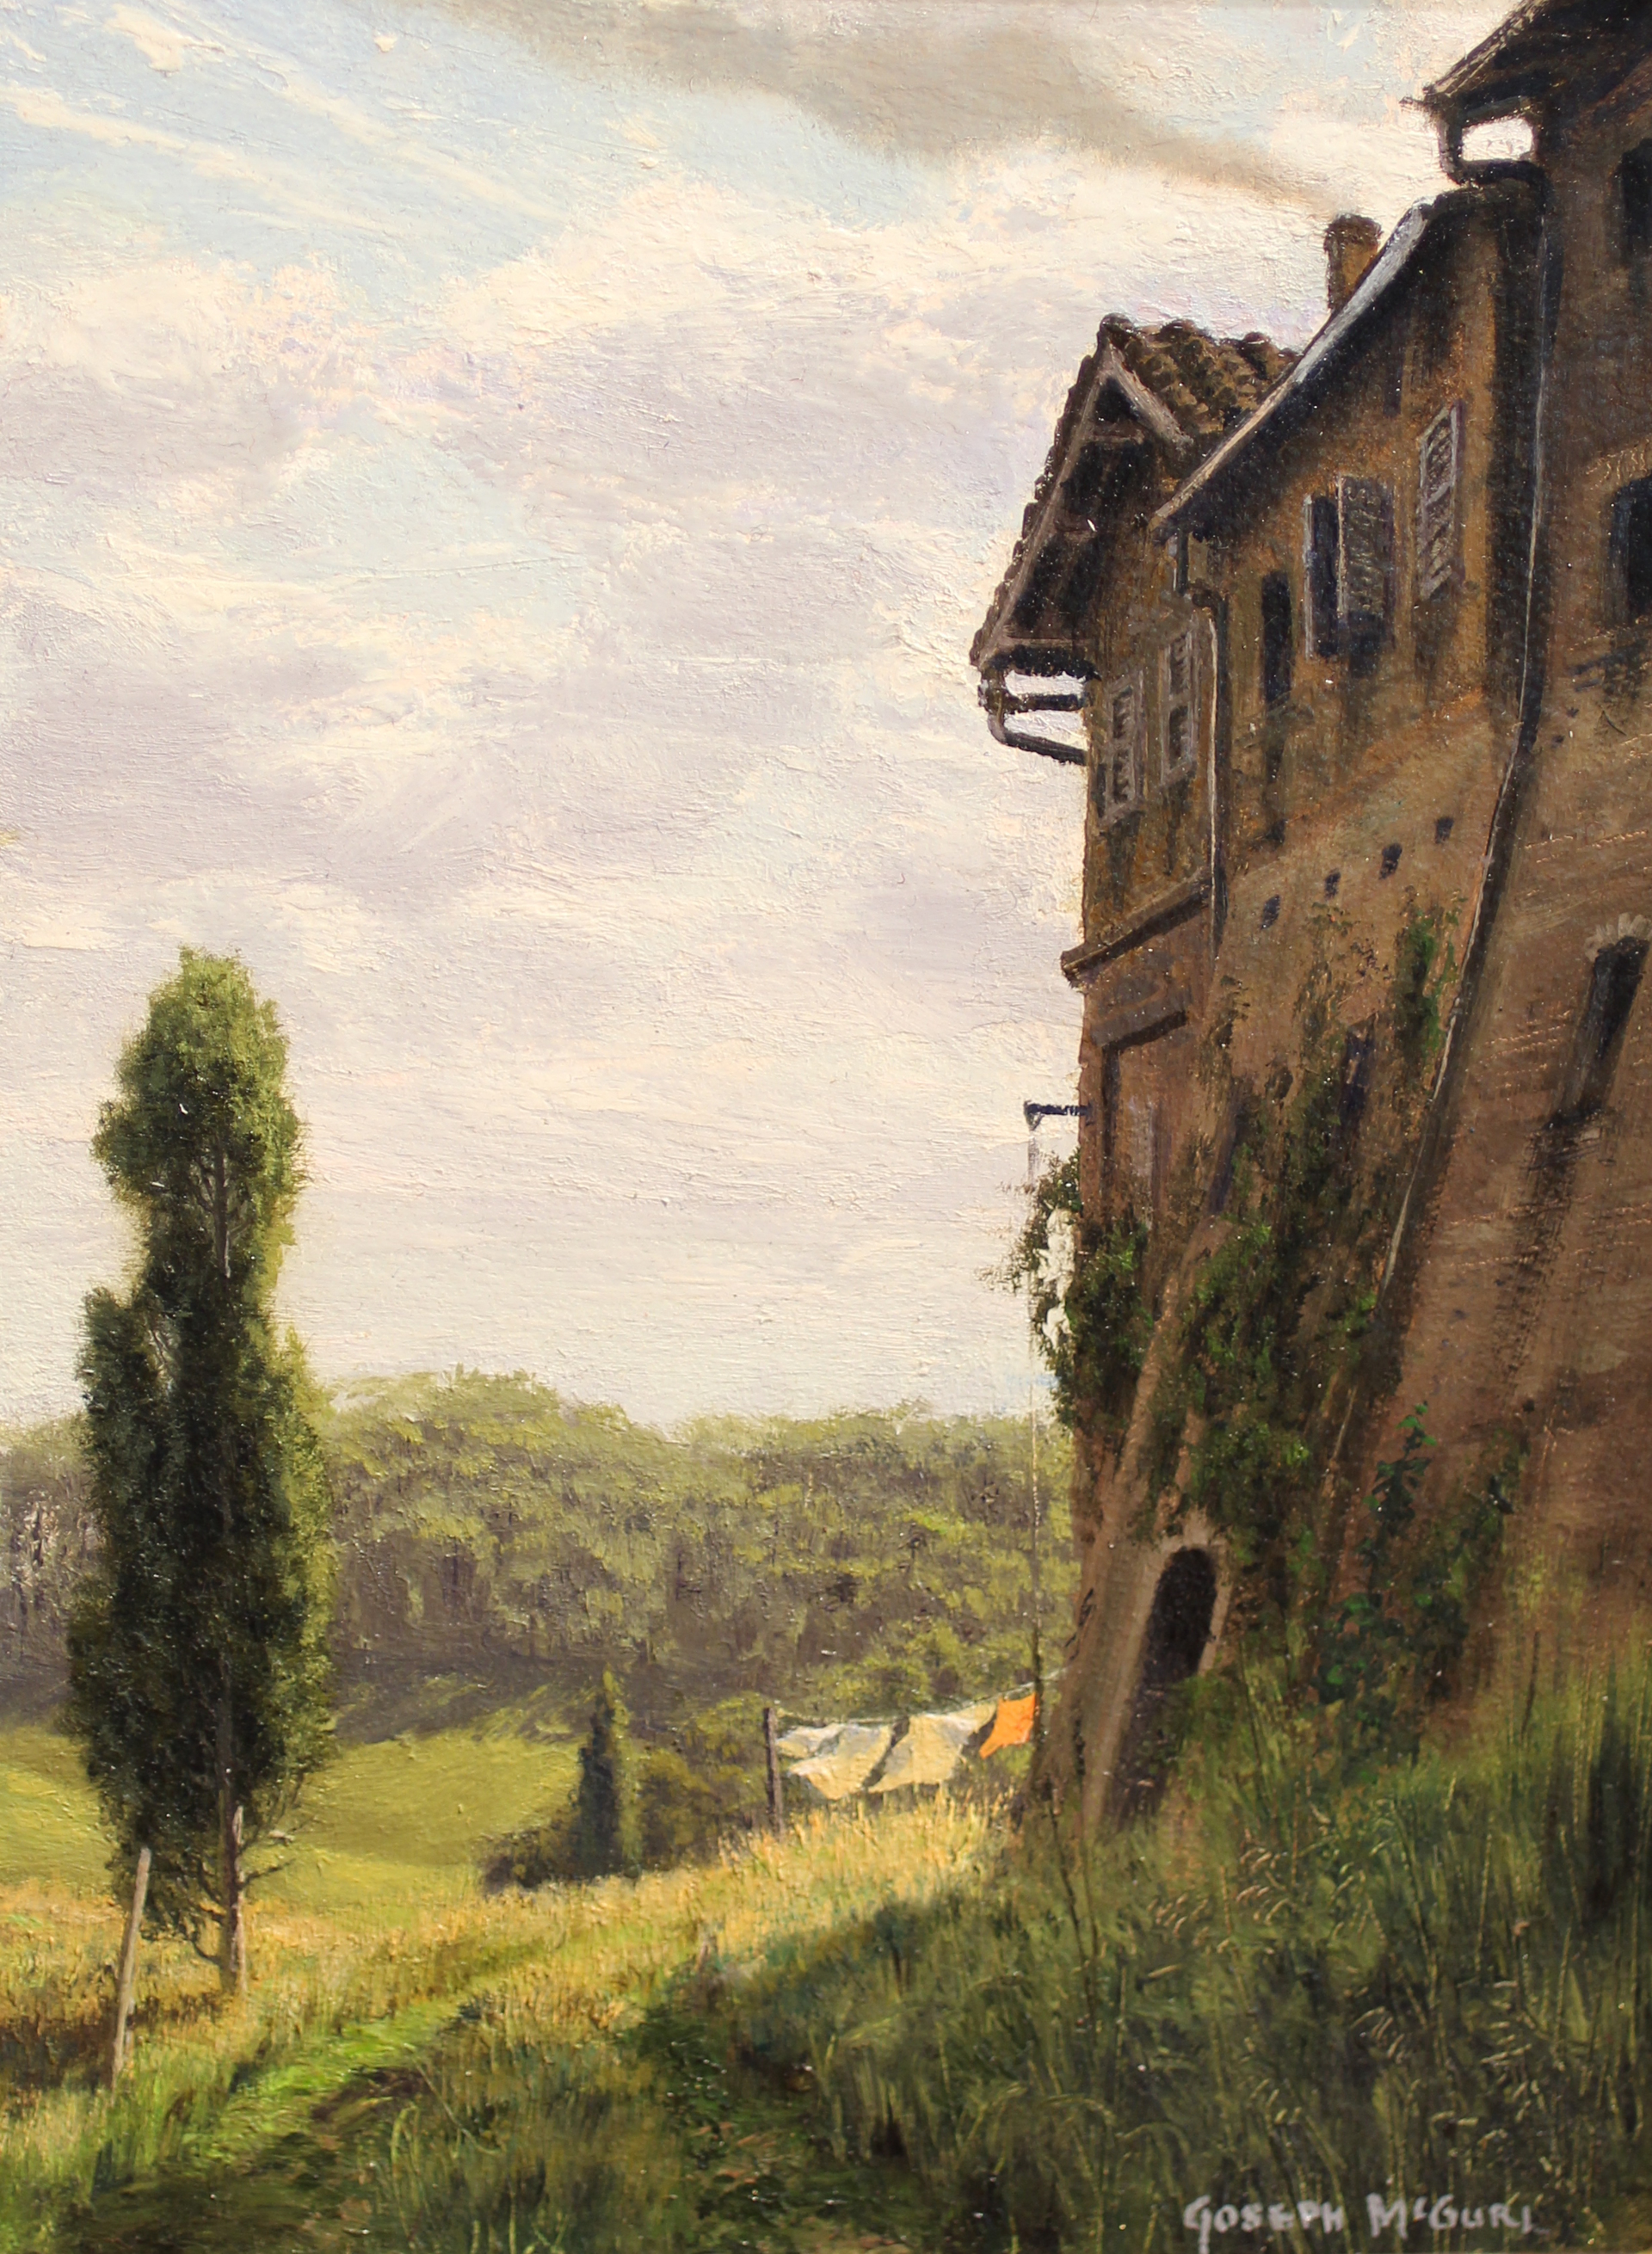 Convent Wall, Tuscany by Joseph McGurl